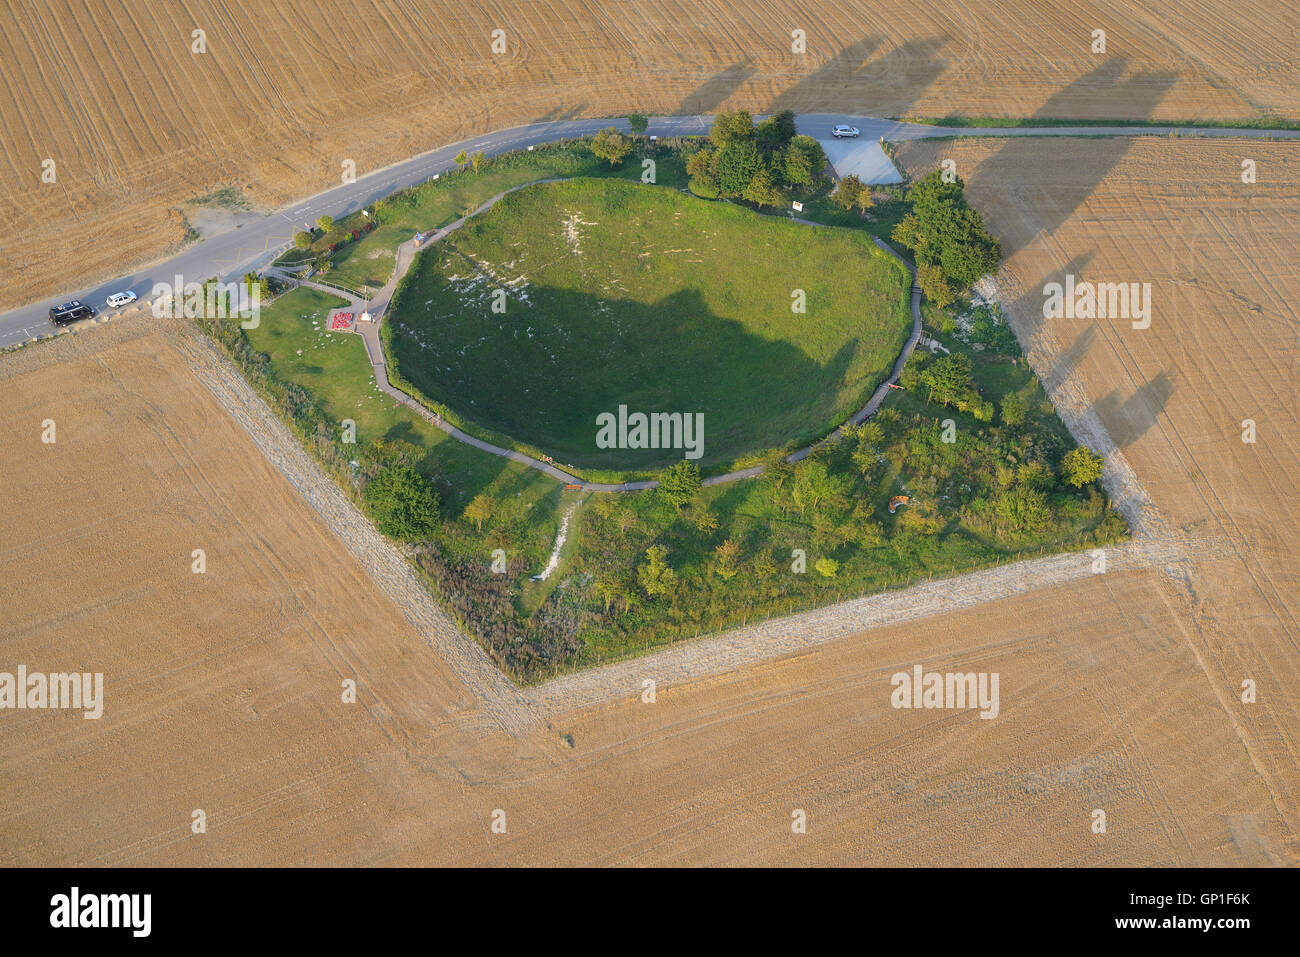 AERIAL VIEW. Mine crater from World War One. Lochnagar Crater, Ovillers-la-Boisselle, Somme, Picardie, Hauts-de-France, France. Stock Photo